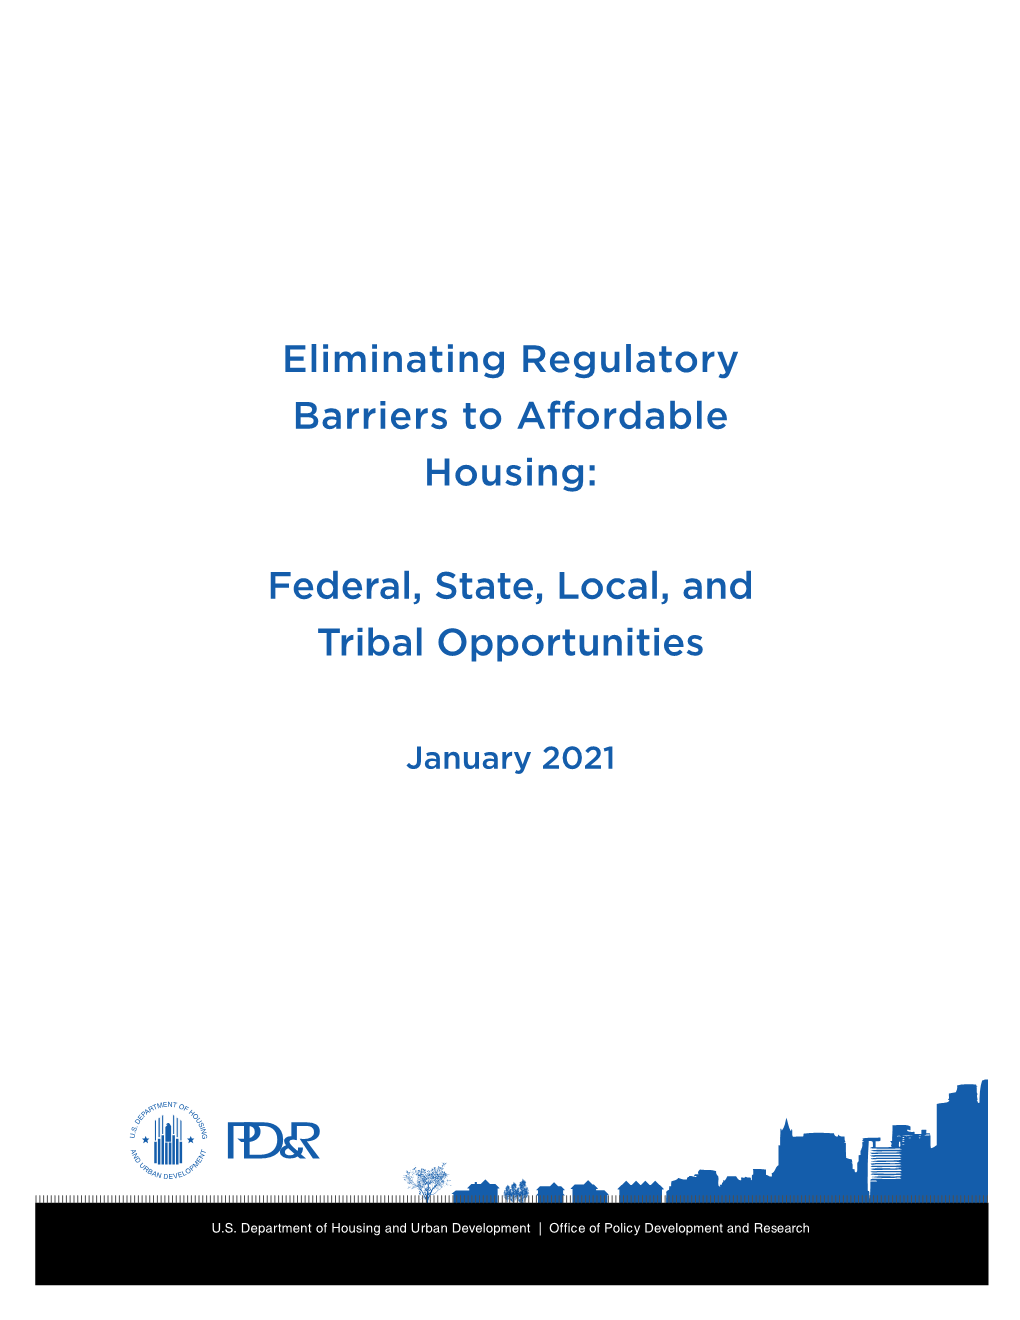 Eliminating Regulatory Barriers to Affordable Housing